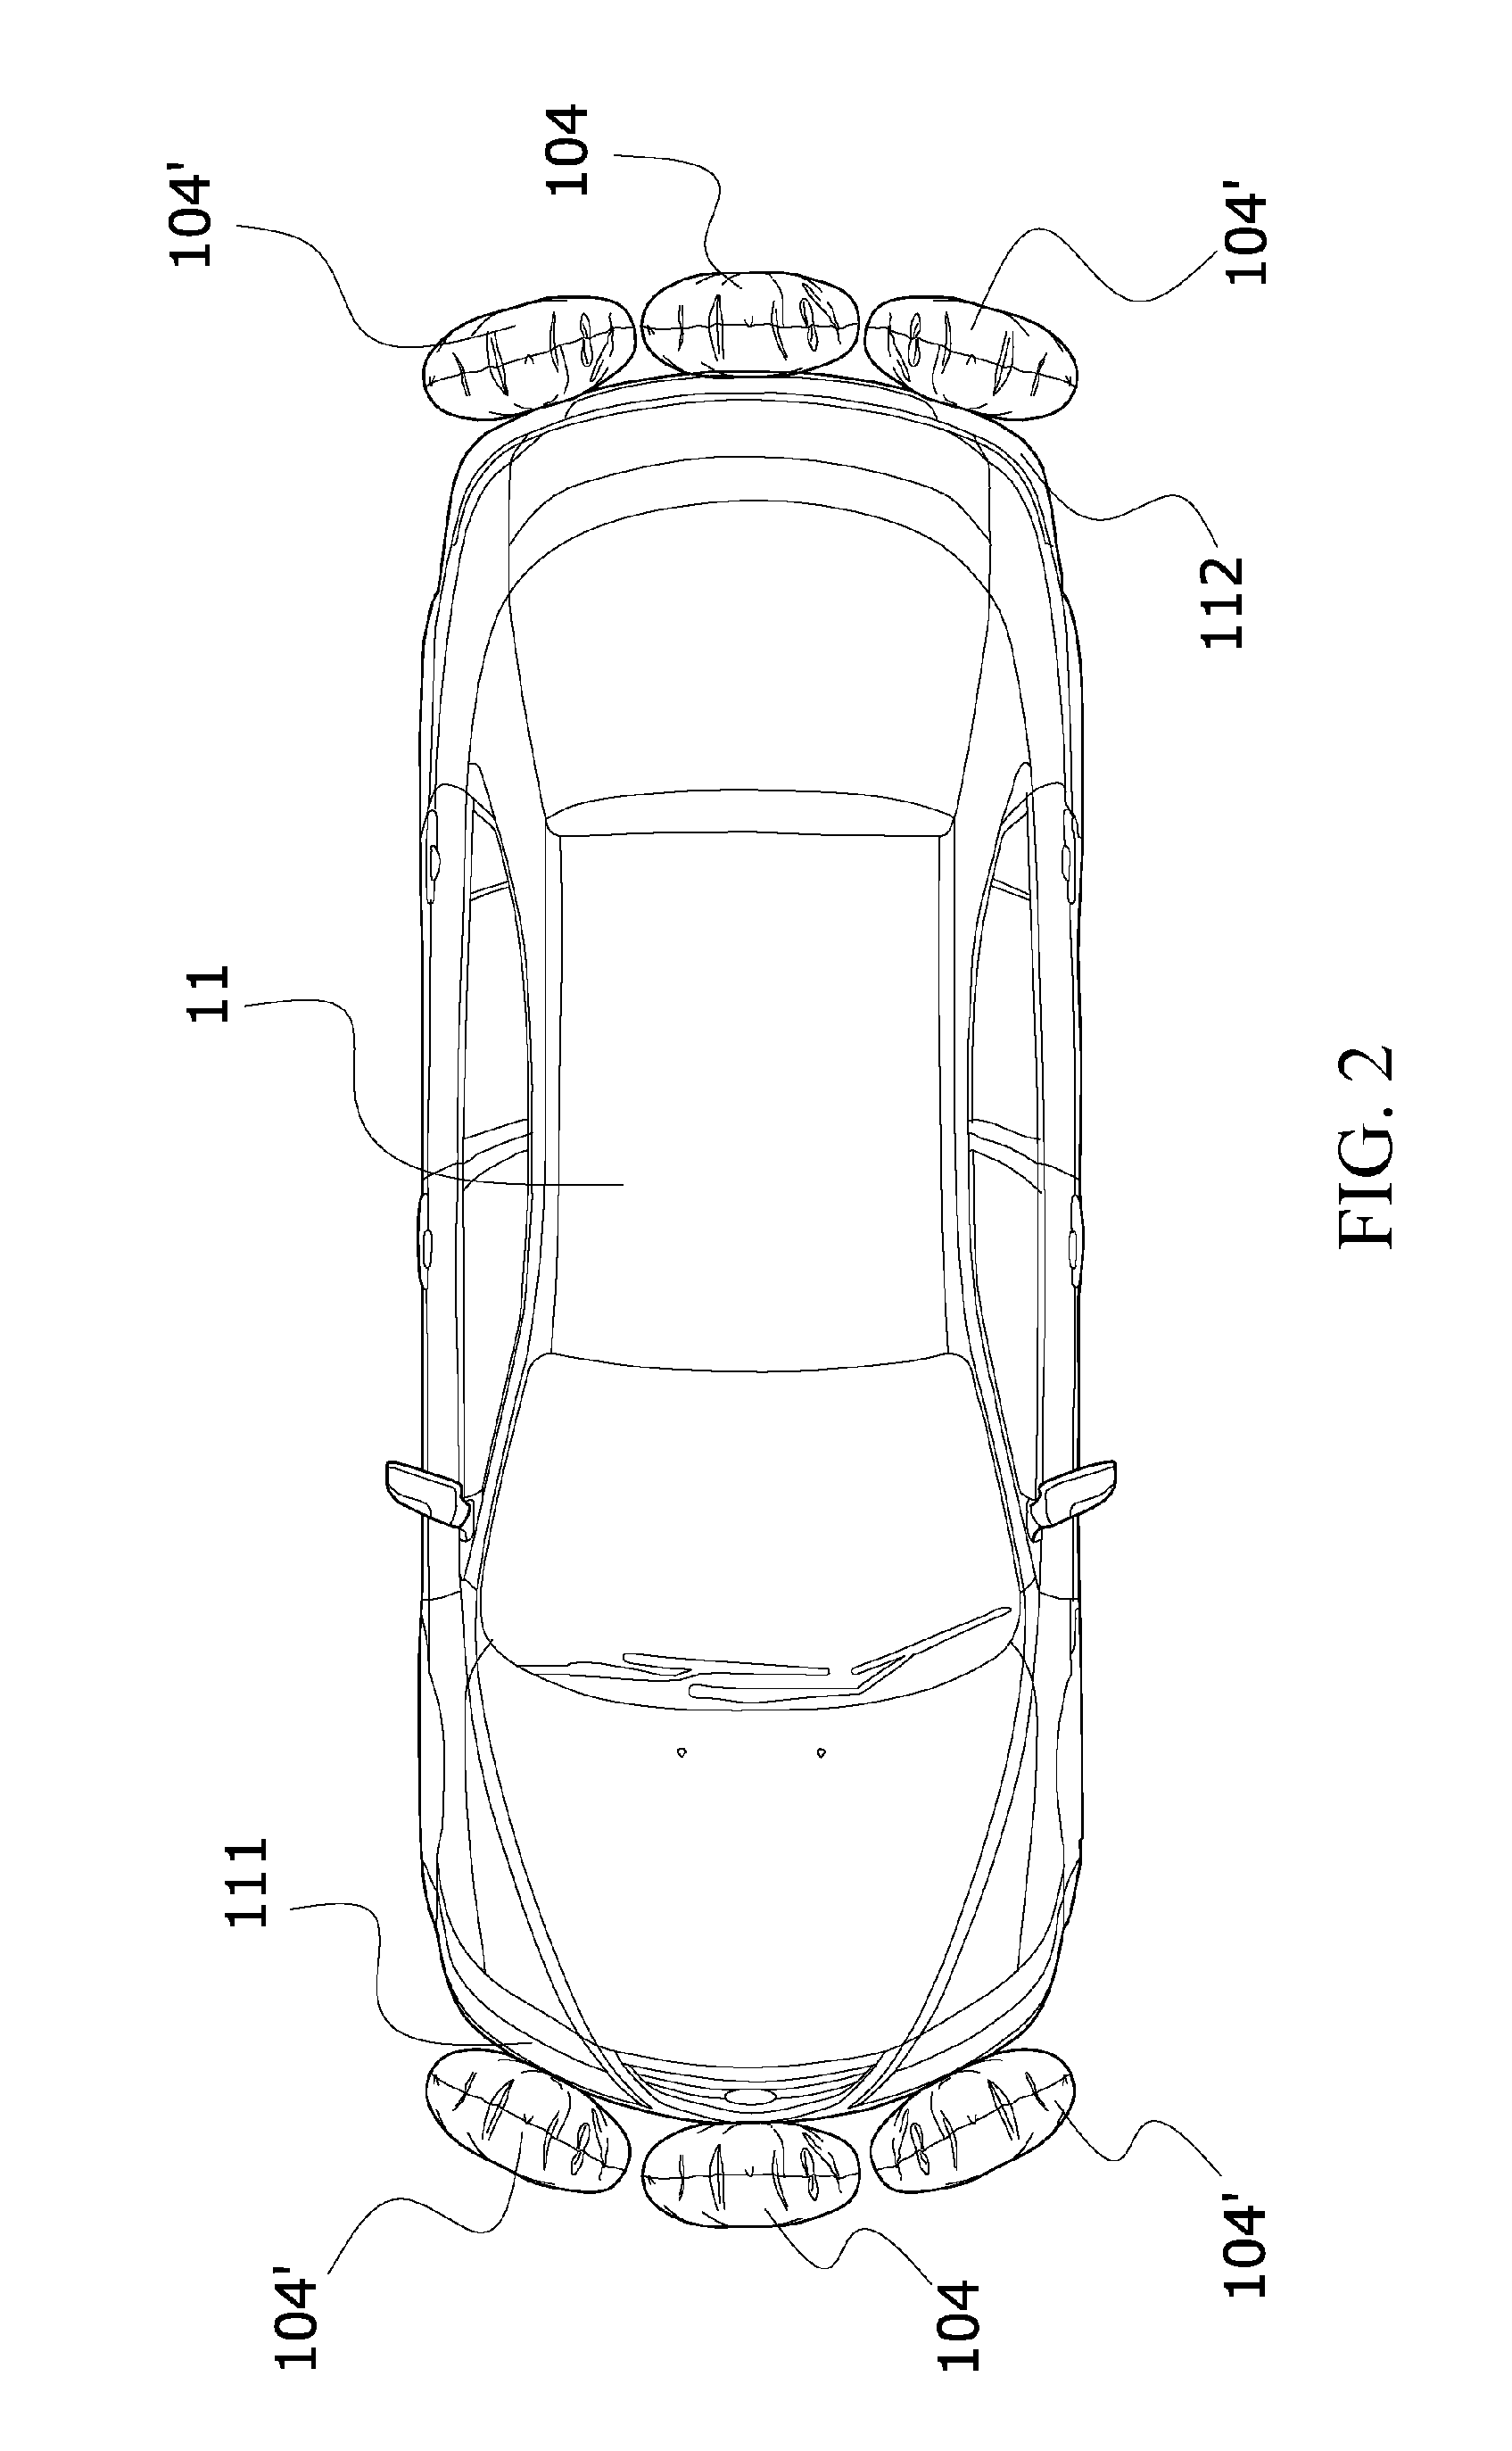 Method of actuating external active safety system for vehicle